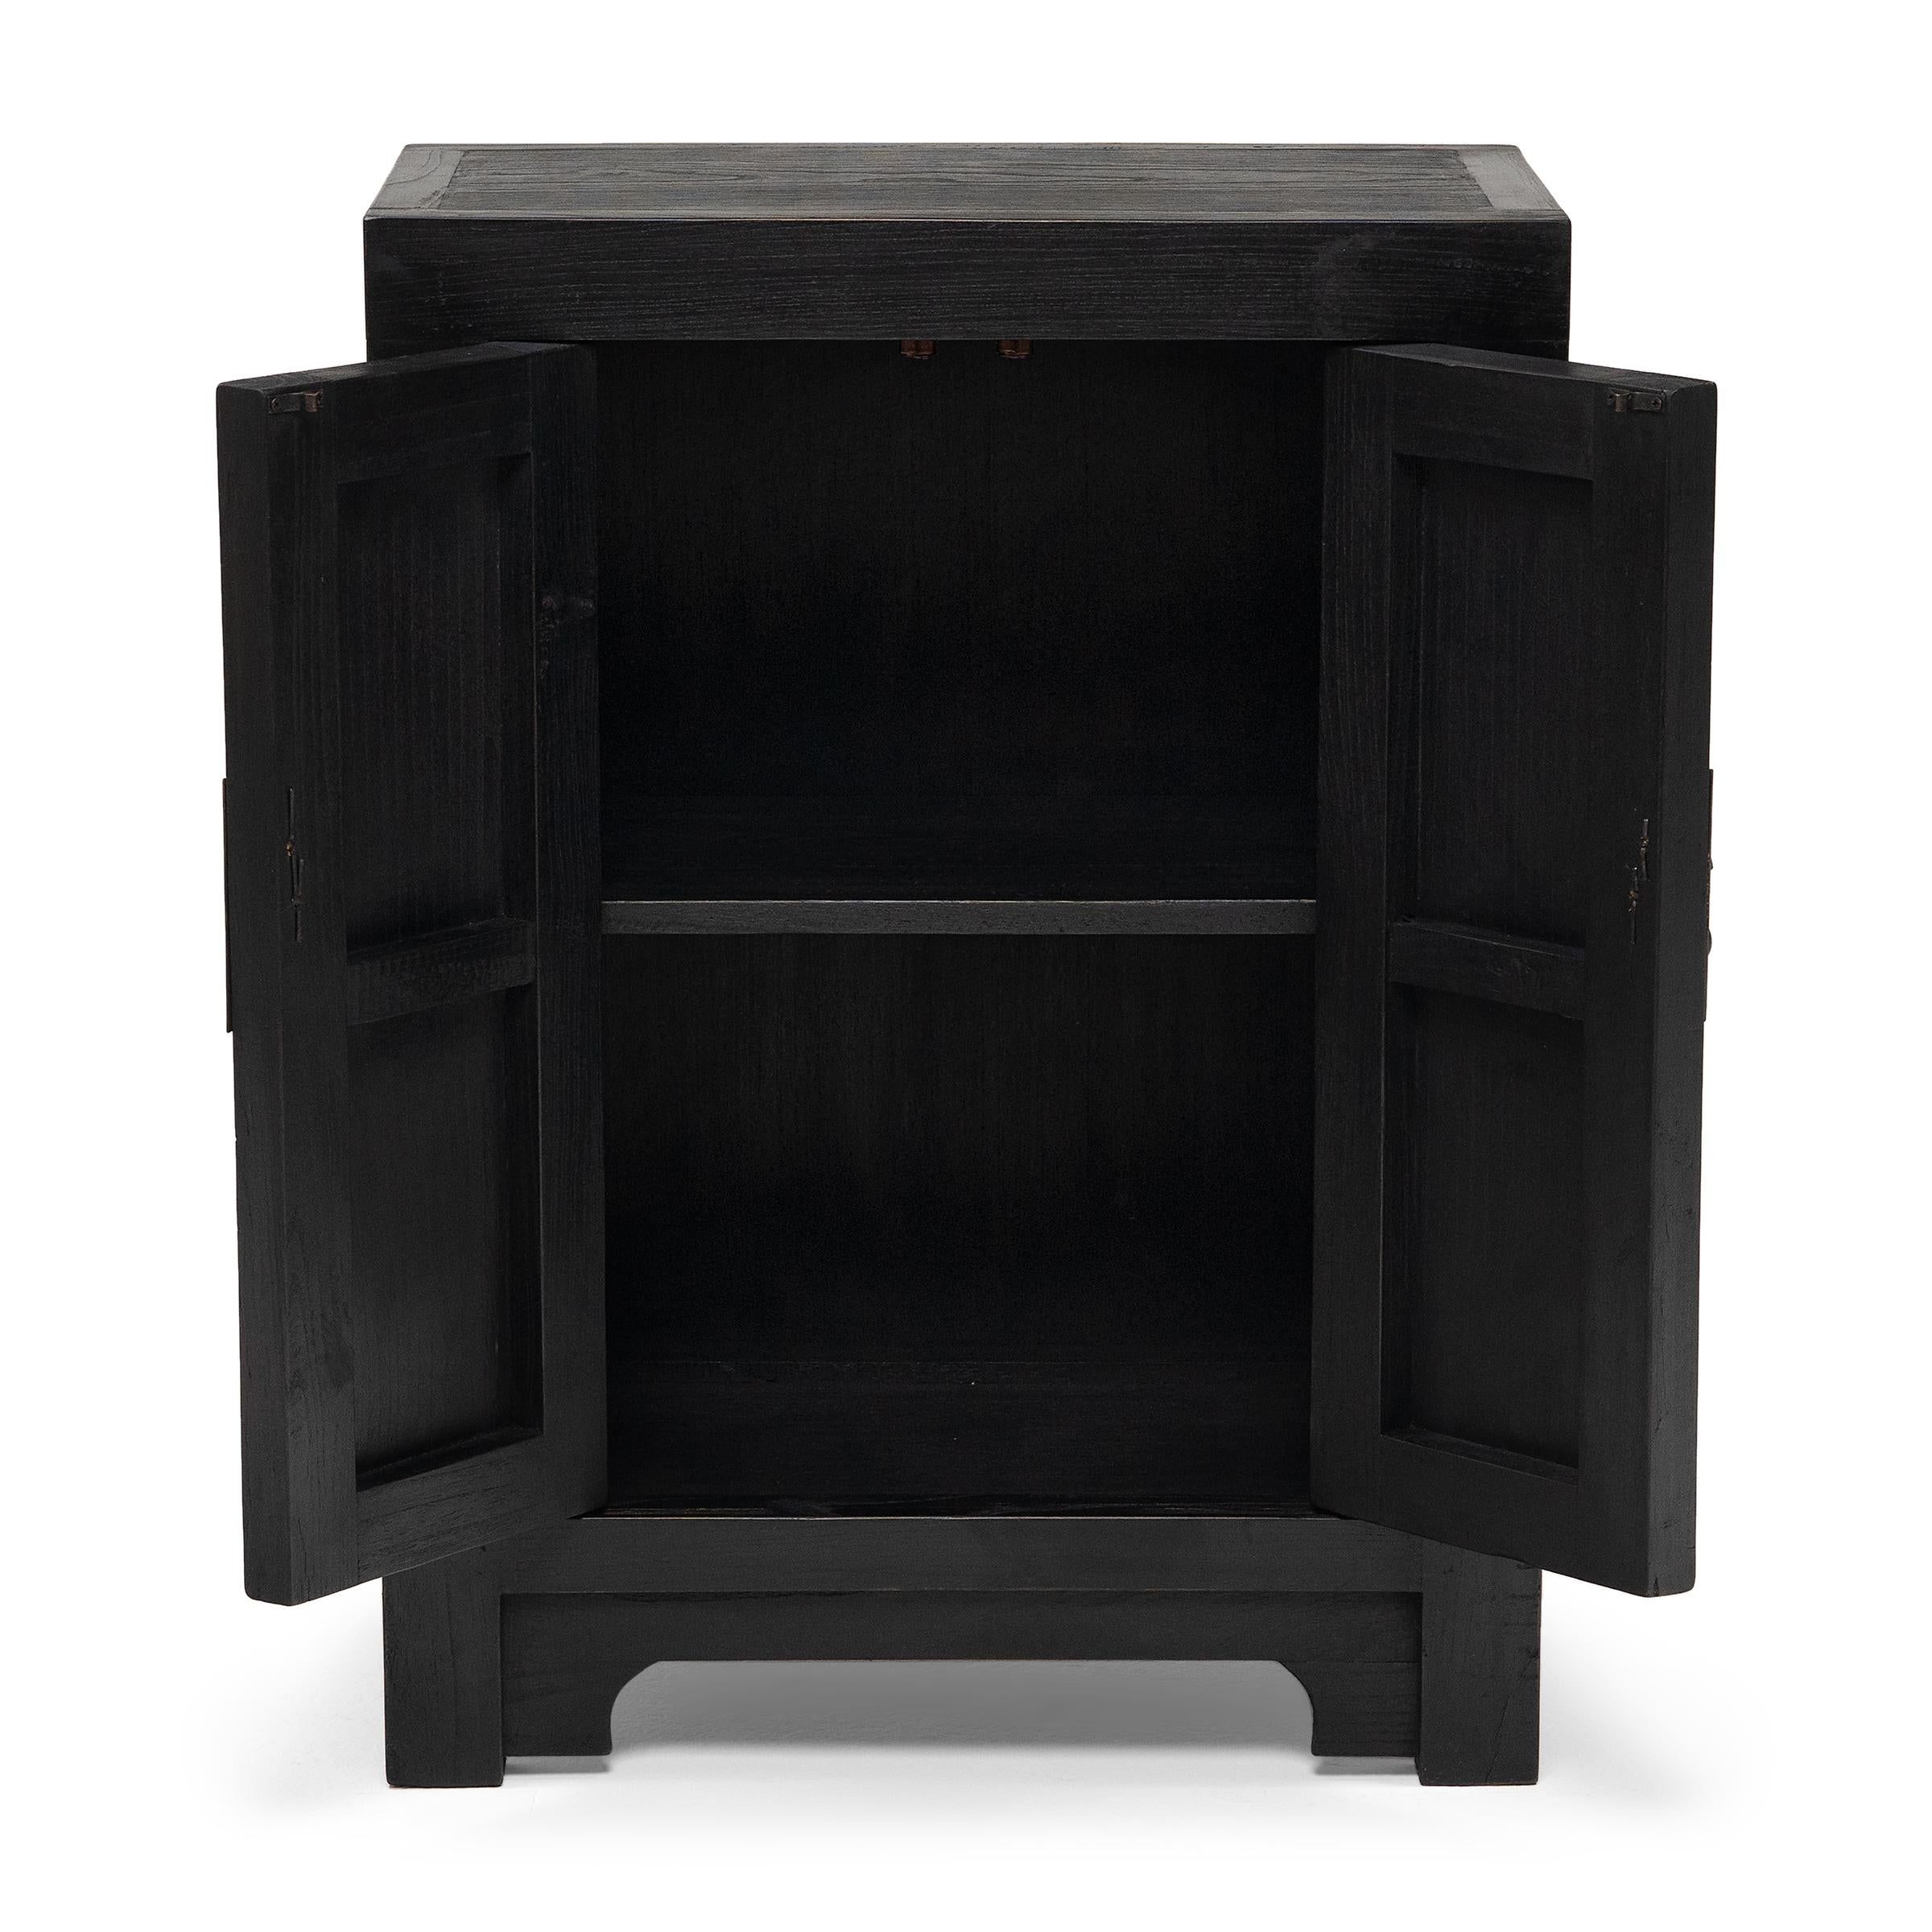 Contemporary Chinese Square Corner Locking Cabinet For Sale